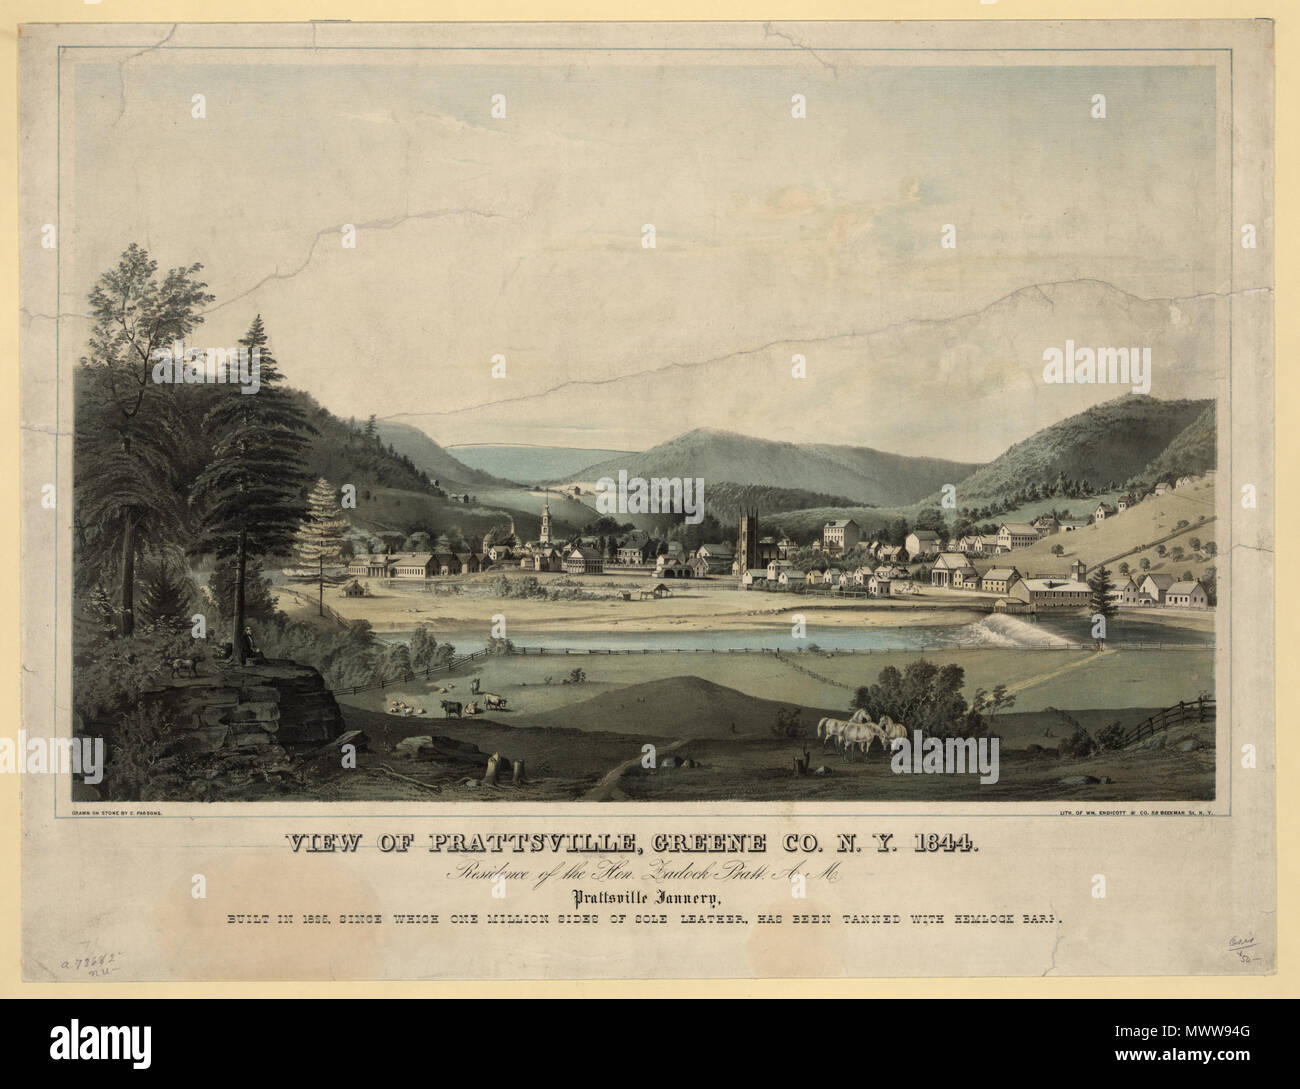 . English: A drawing and lithograph of Prattsville from 1844. The text below the drawing reads: VIEW OF PRATTSVILLE, GREENE Co. N. Y. 1844. Presidence of the Hon. Zadock Pratt. A. M. Prattsville Tannery, BUILT IN 1825, SINCE WHICH ONE MILLION SIDES OF SOLE LEATHER, HAS BEEN TANNED WITH HEMLOCK BARK. 1844. C. Parsons 501 Prattsville New York 1844 drawing uncropped Stock Photo